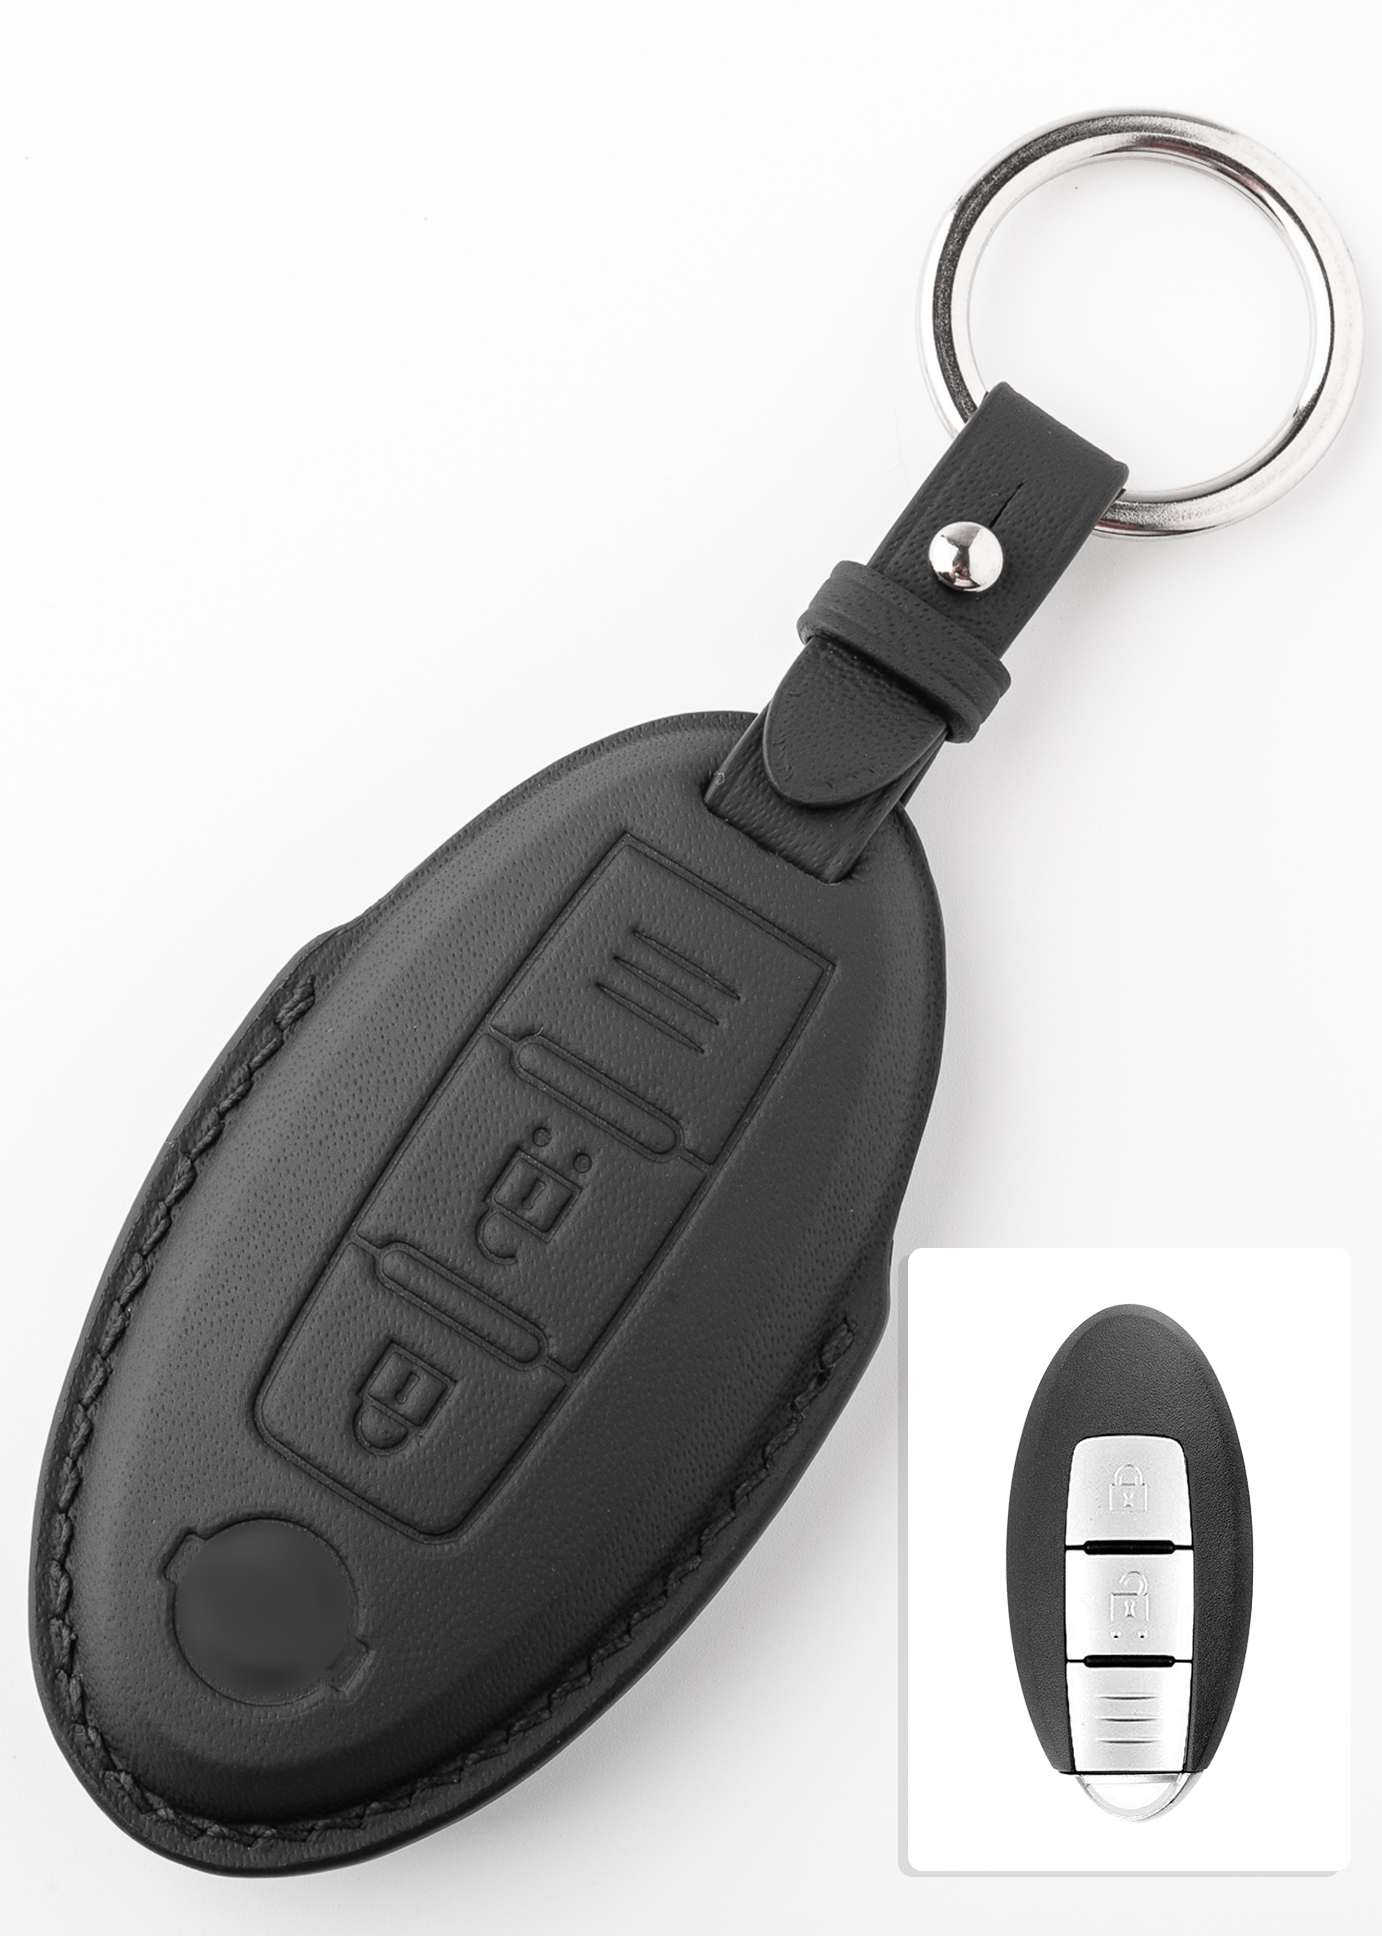 Timotheus for Nissan key fob cover case, Compatible with Nissan key case, Handmade Genuine Leather for Nissan keychains | NS33